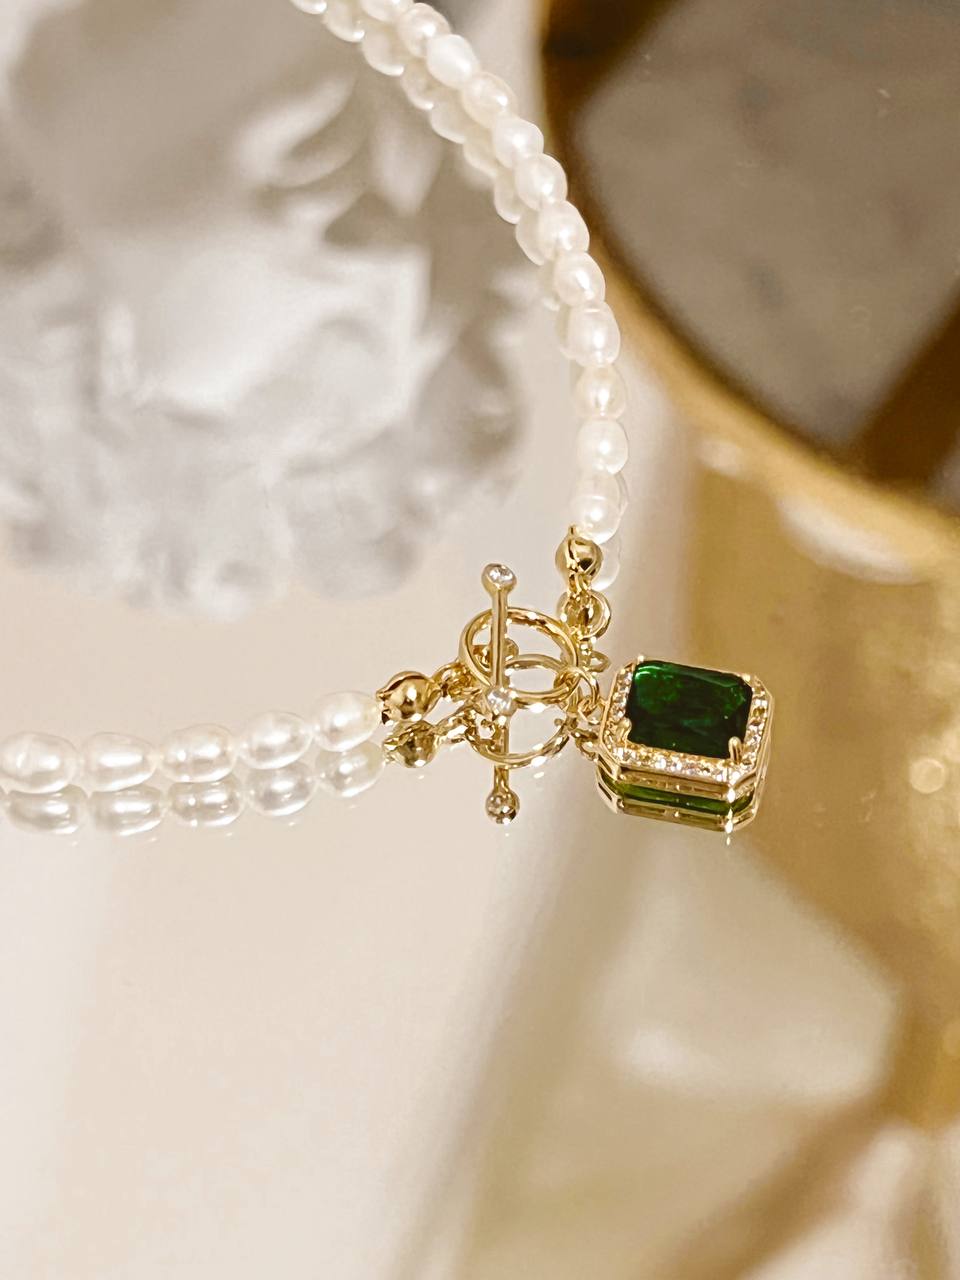 Green stone pendant pearl necklace